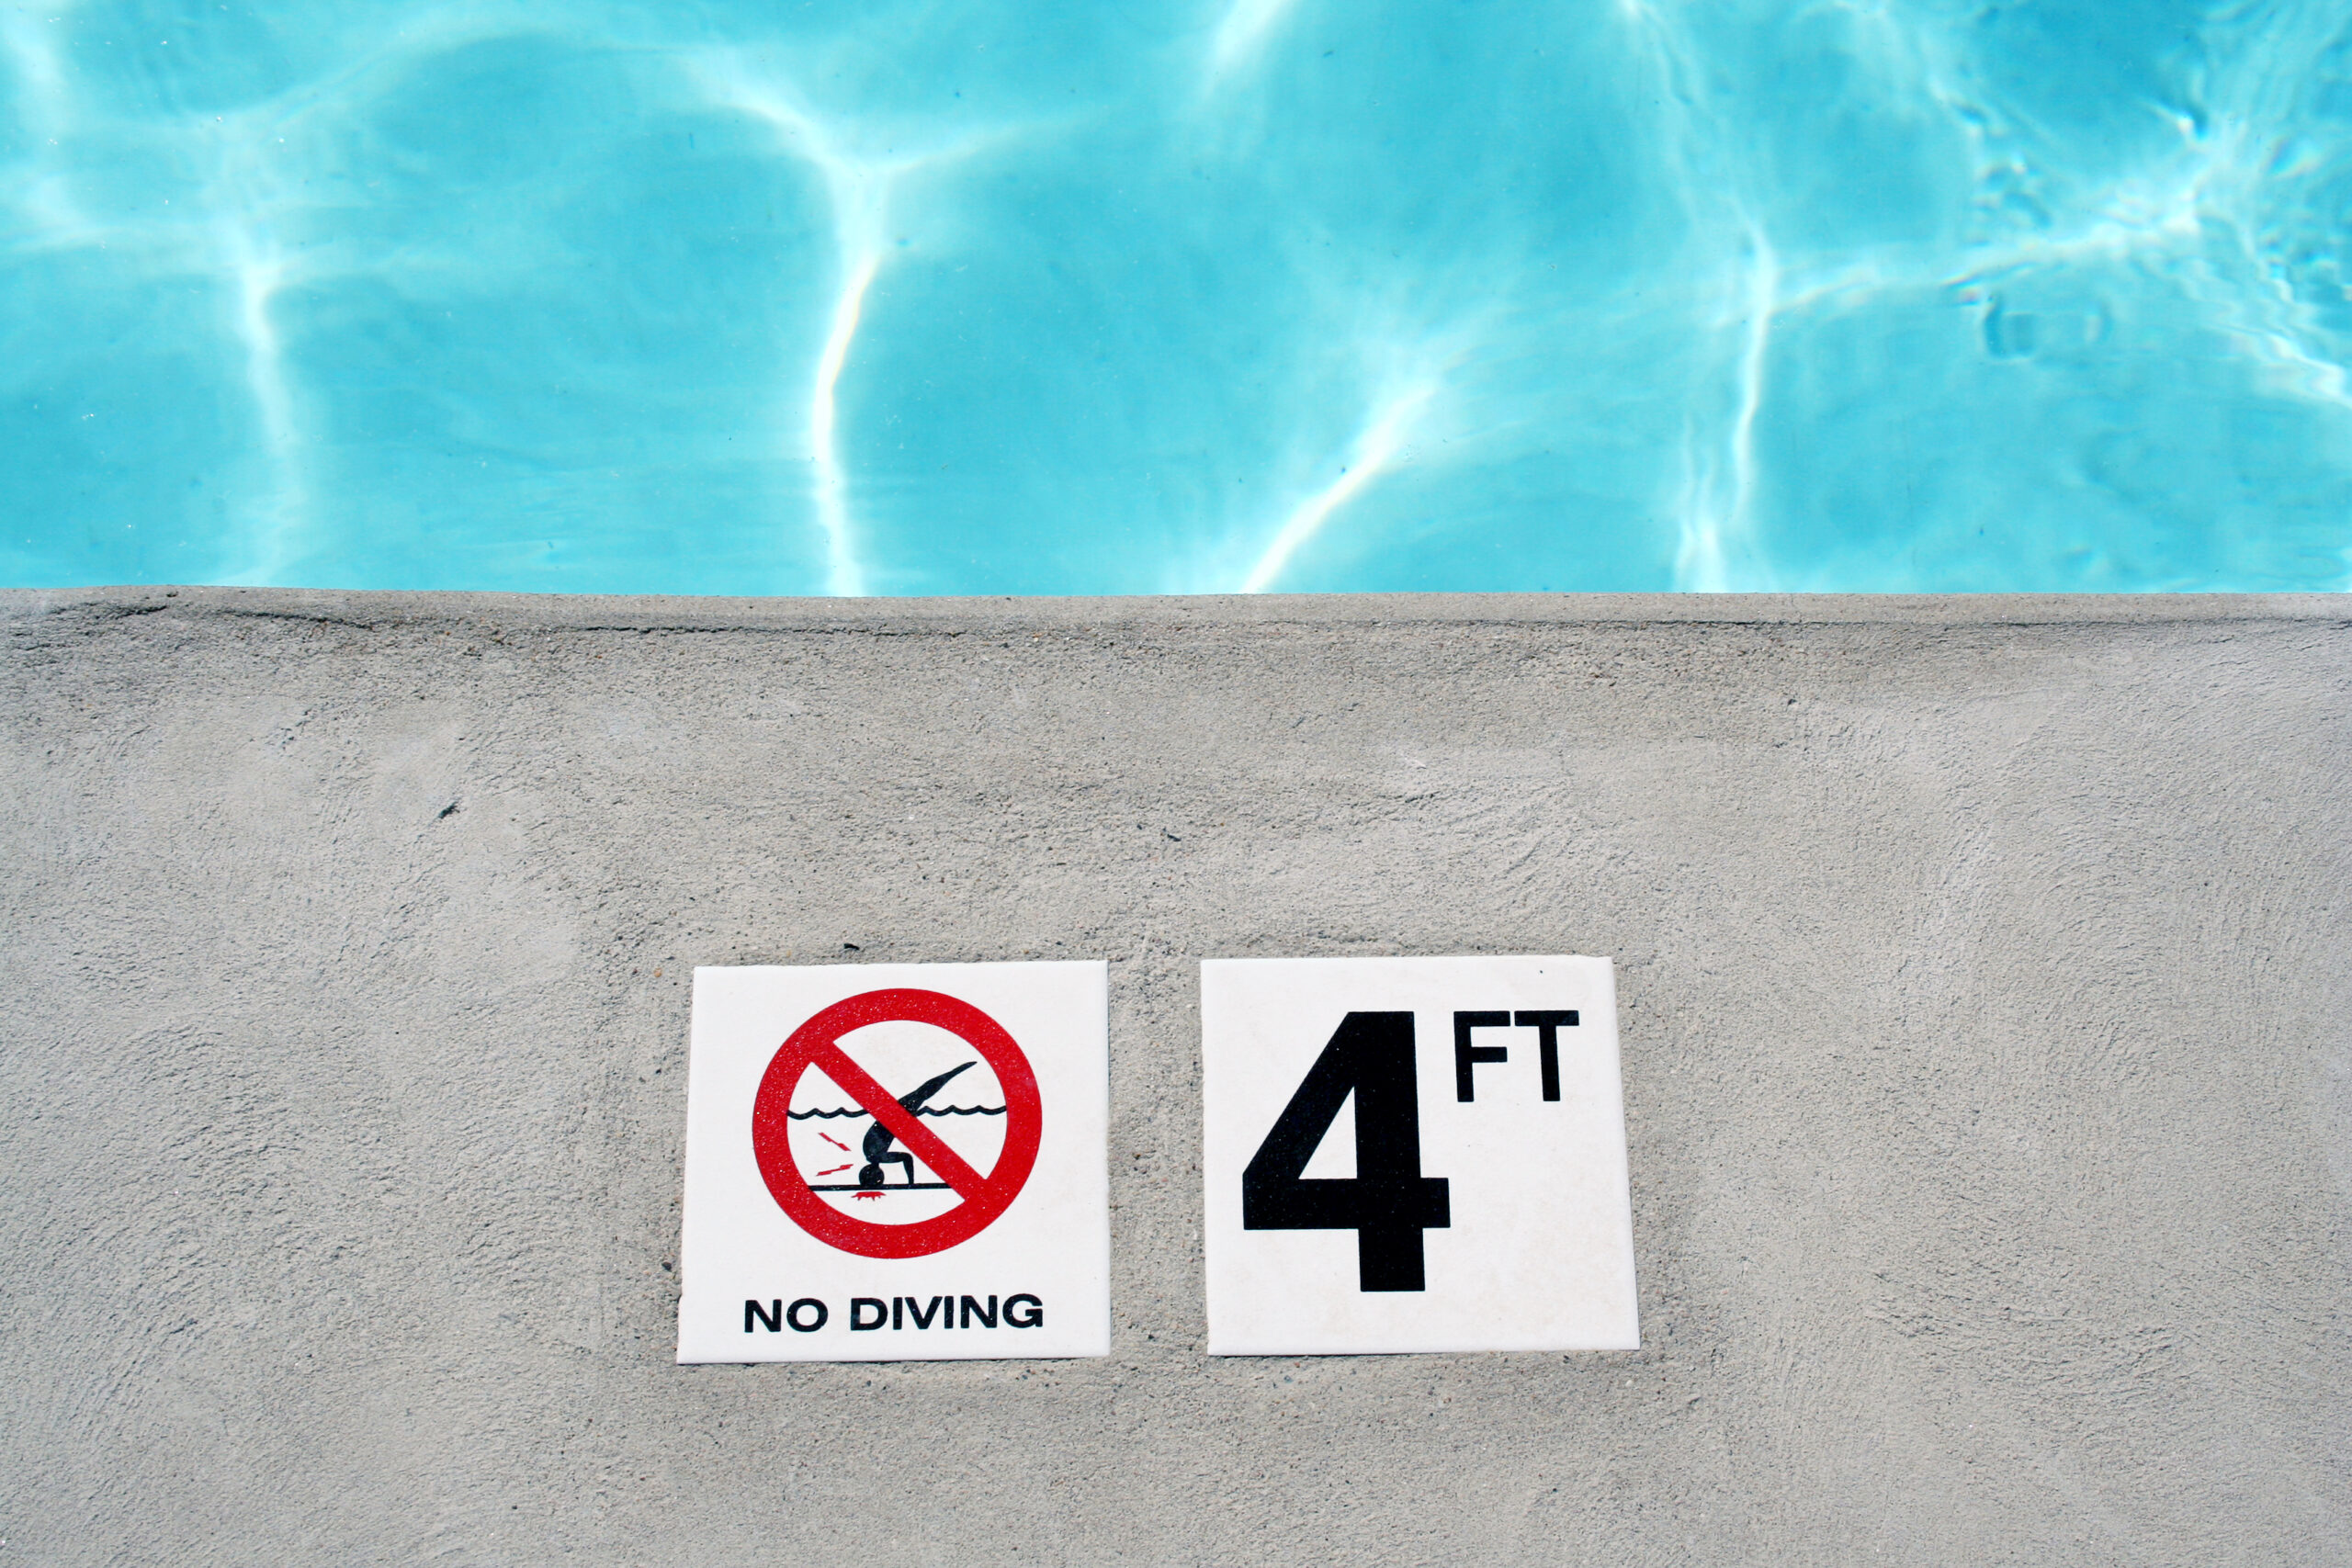 Signage by a pool indicating a depth of 4 feet and prohibiting diving, ensuring safety for pool users.